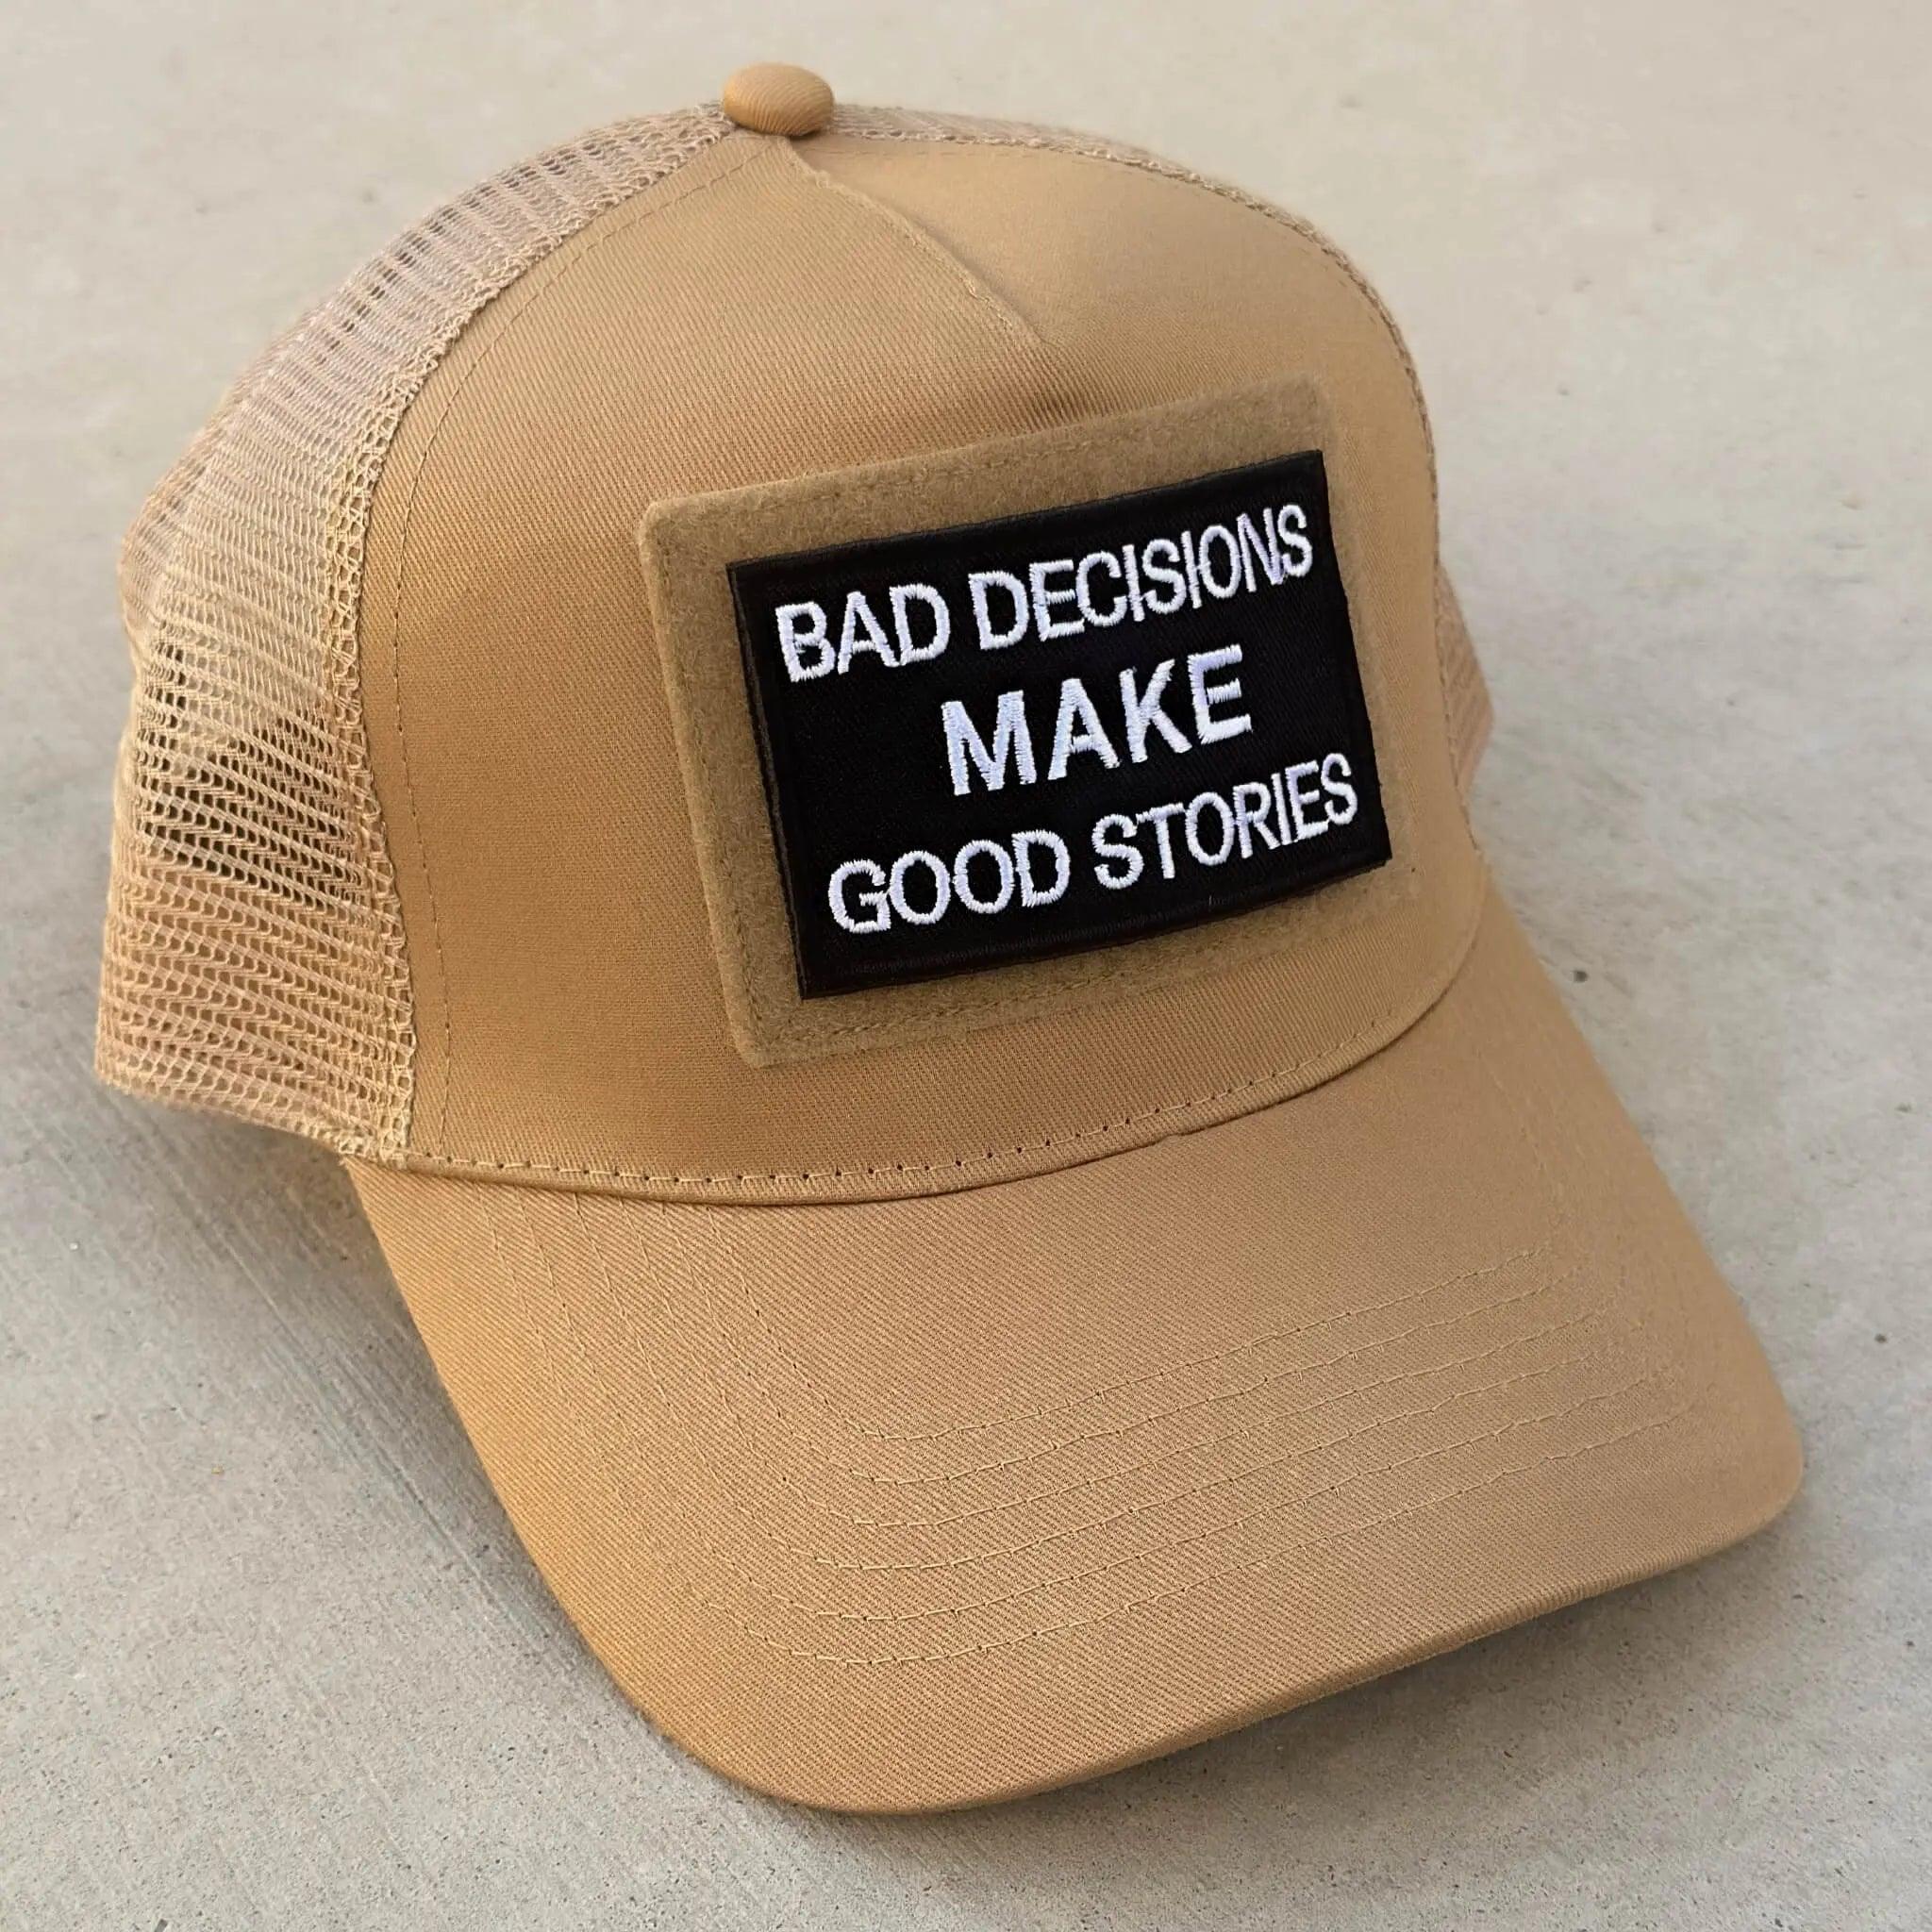 Trucker snapback cap in desert sand with Bad Decision Makes Good Stories patch